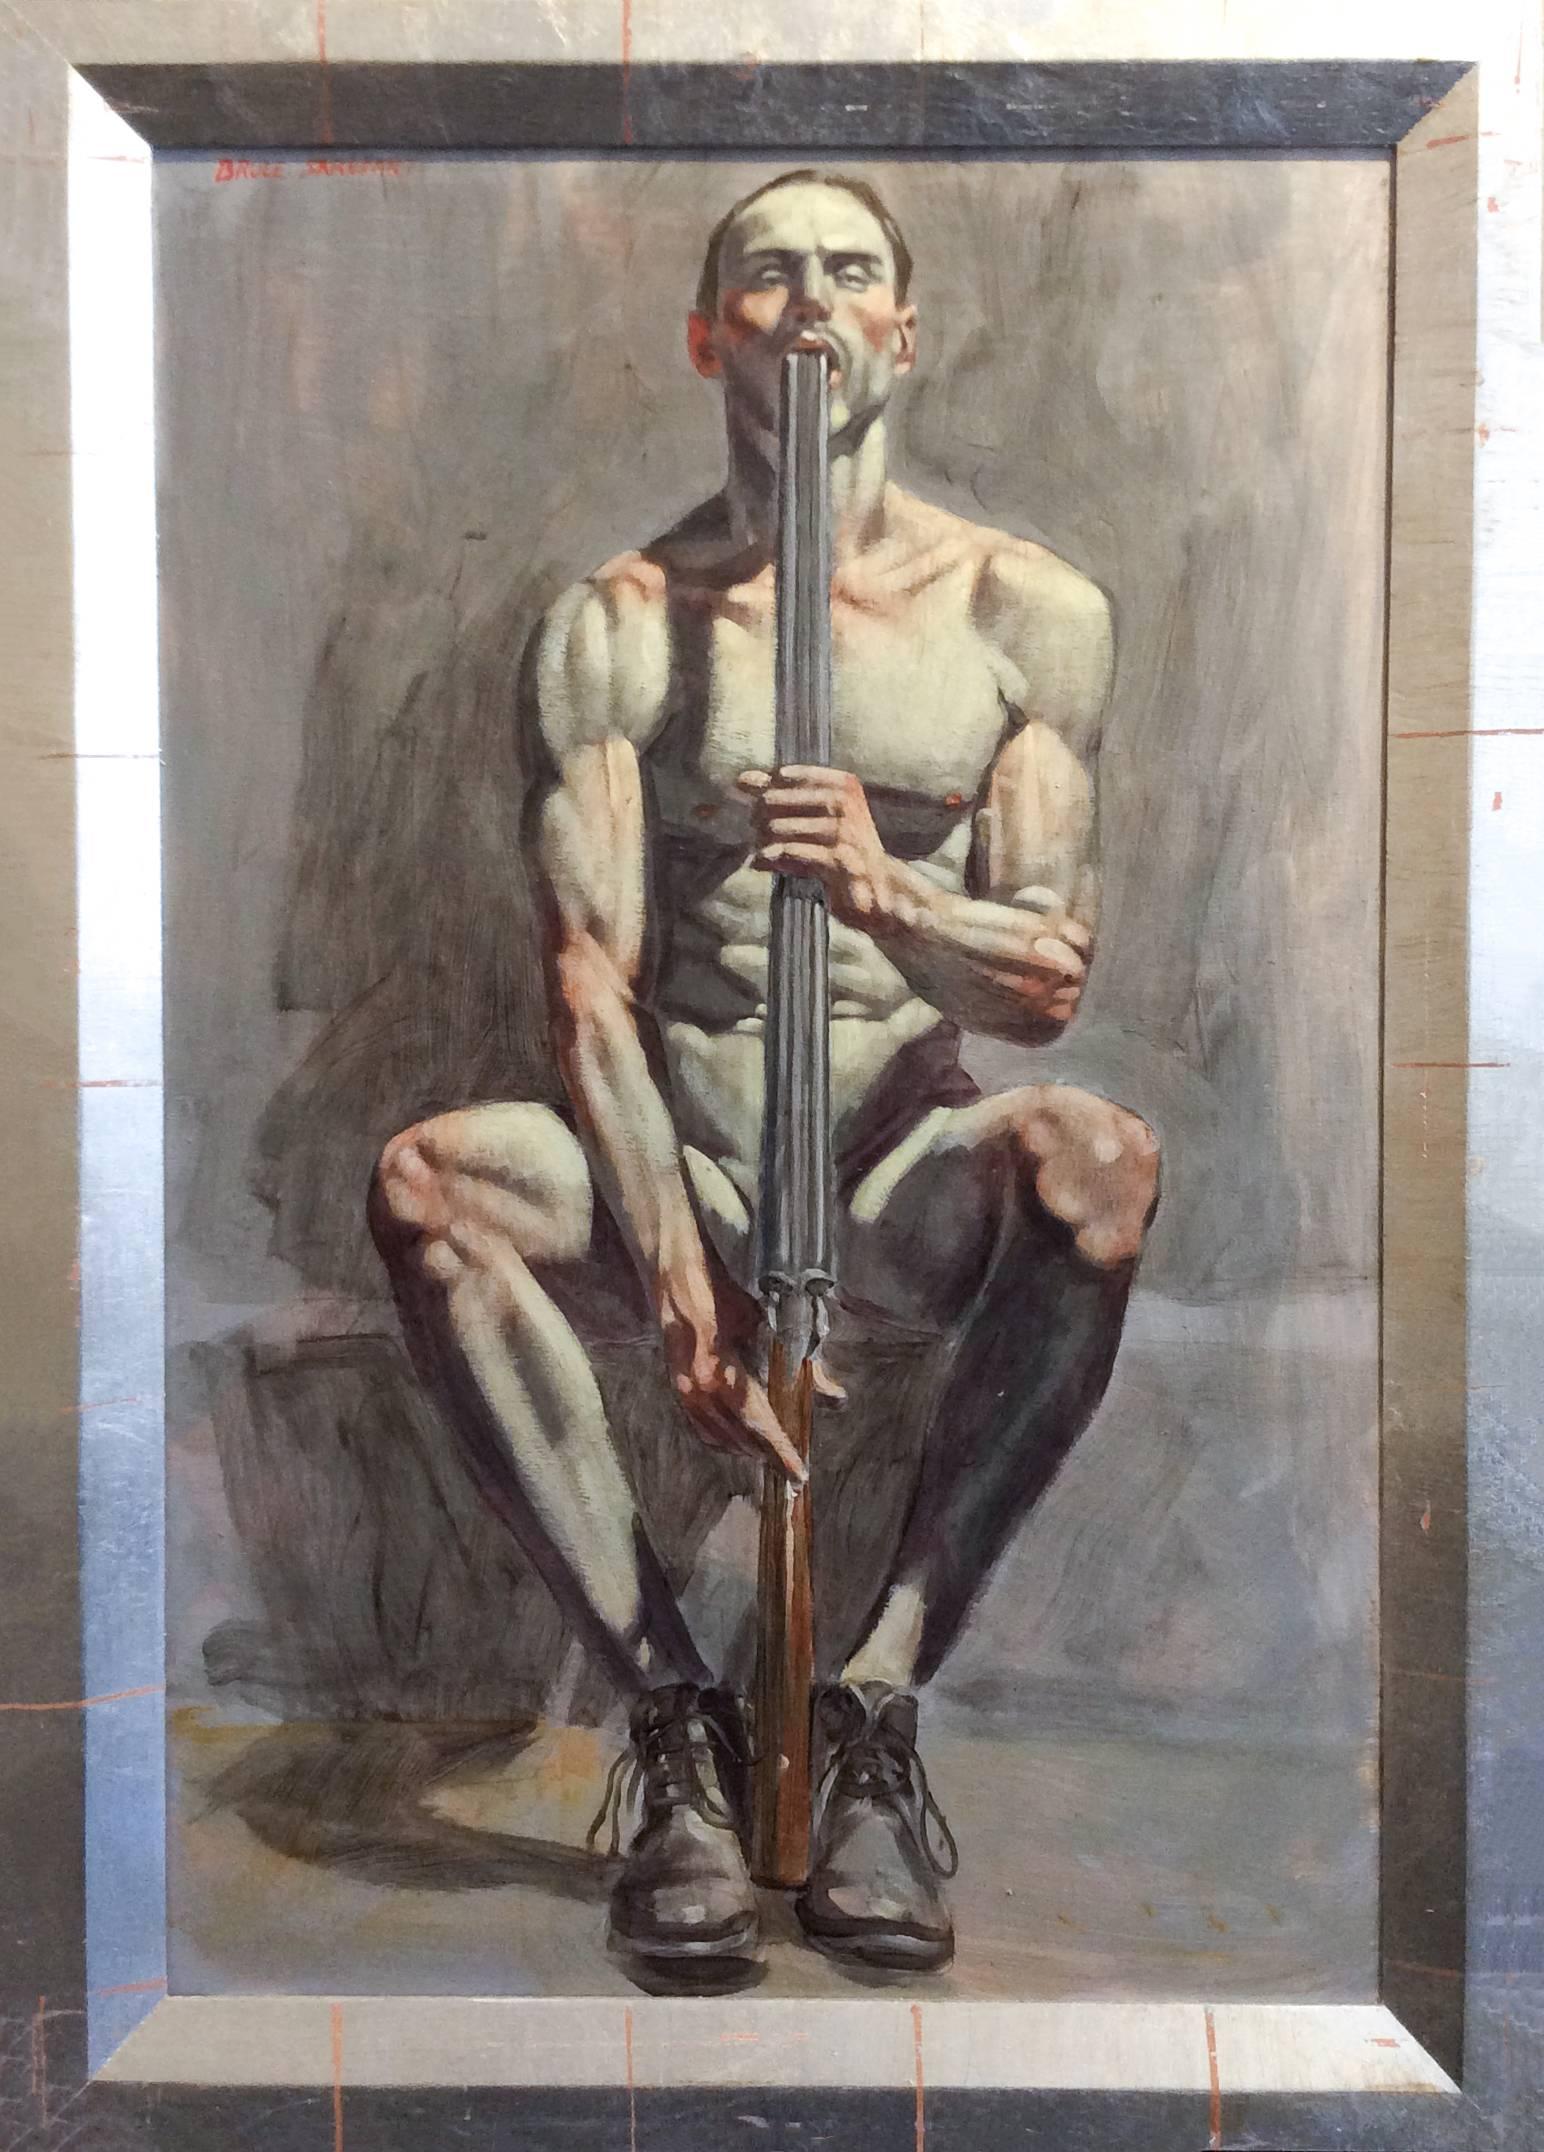 Mark Beard Nude Painting - Armed with Rifle (Vertical Figurative Oil Painting of Nude Man with Rifle)